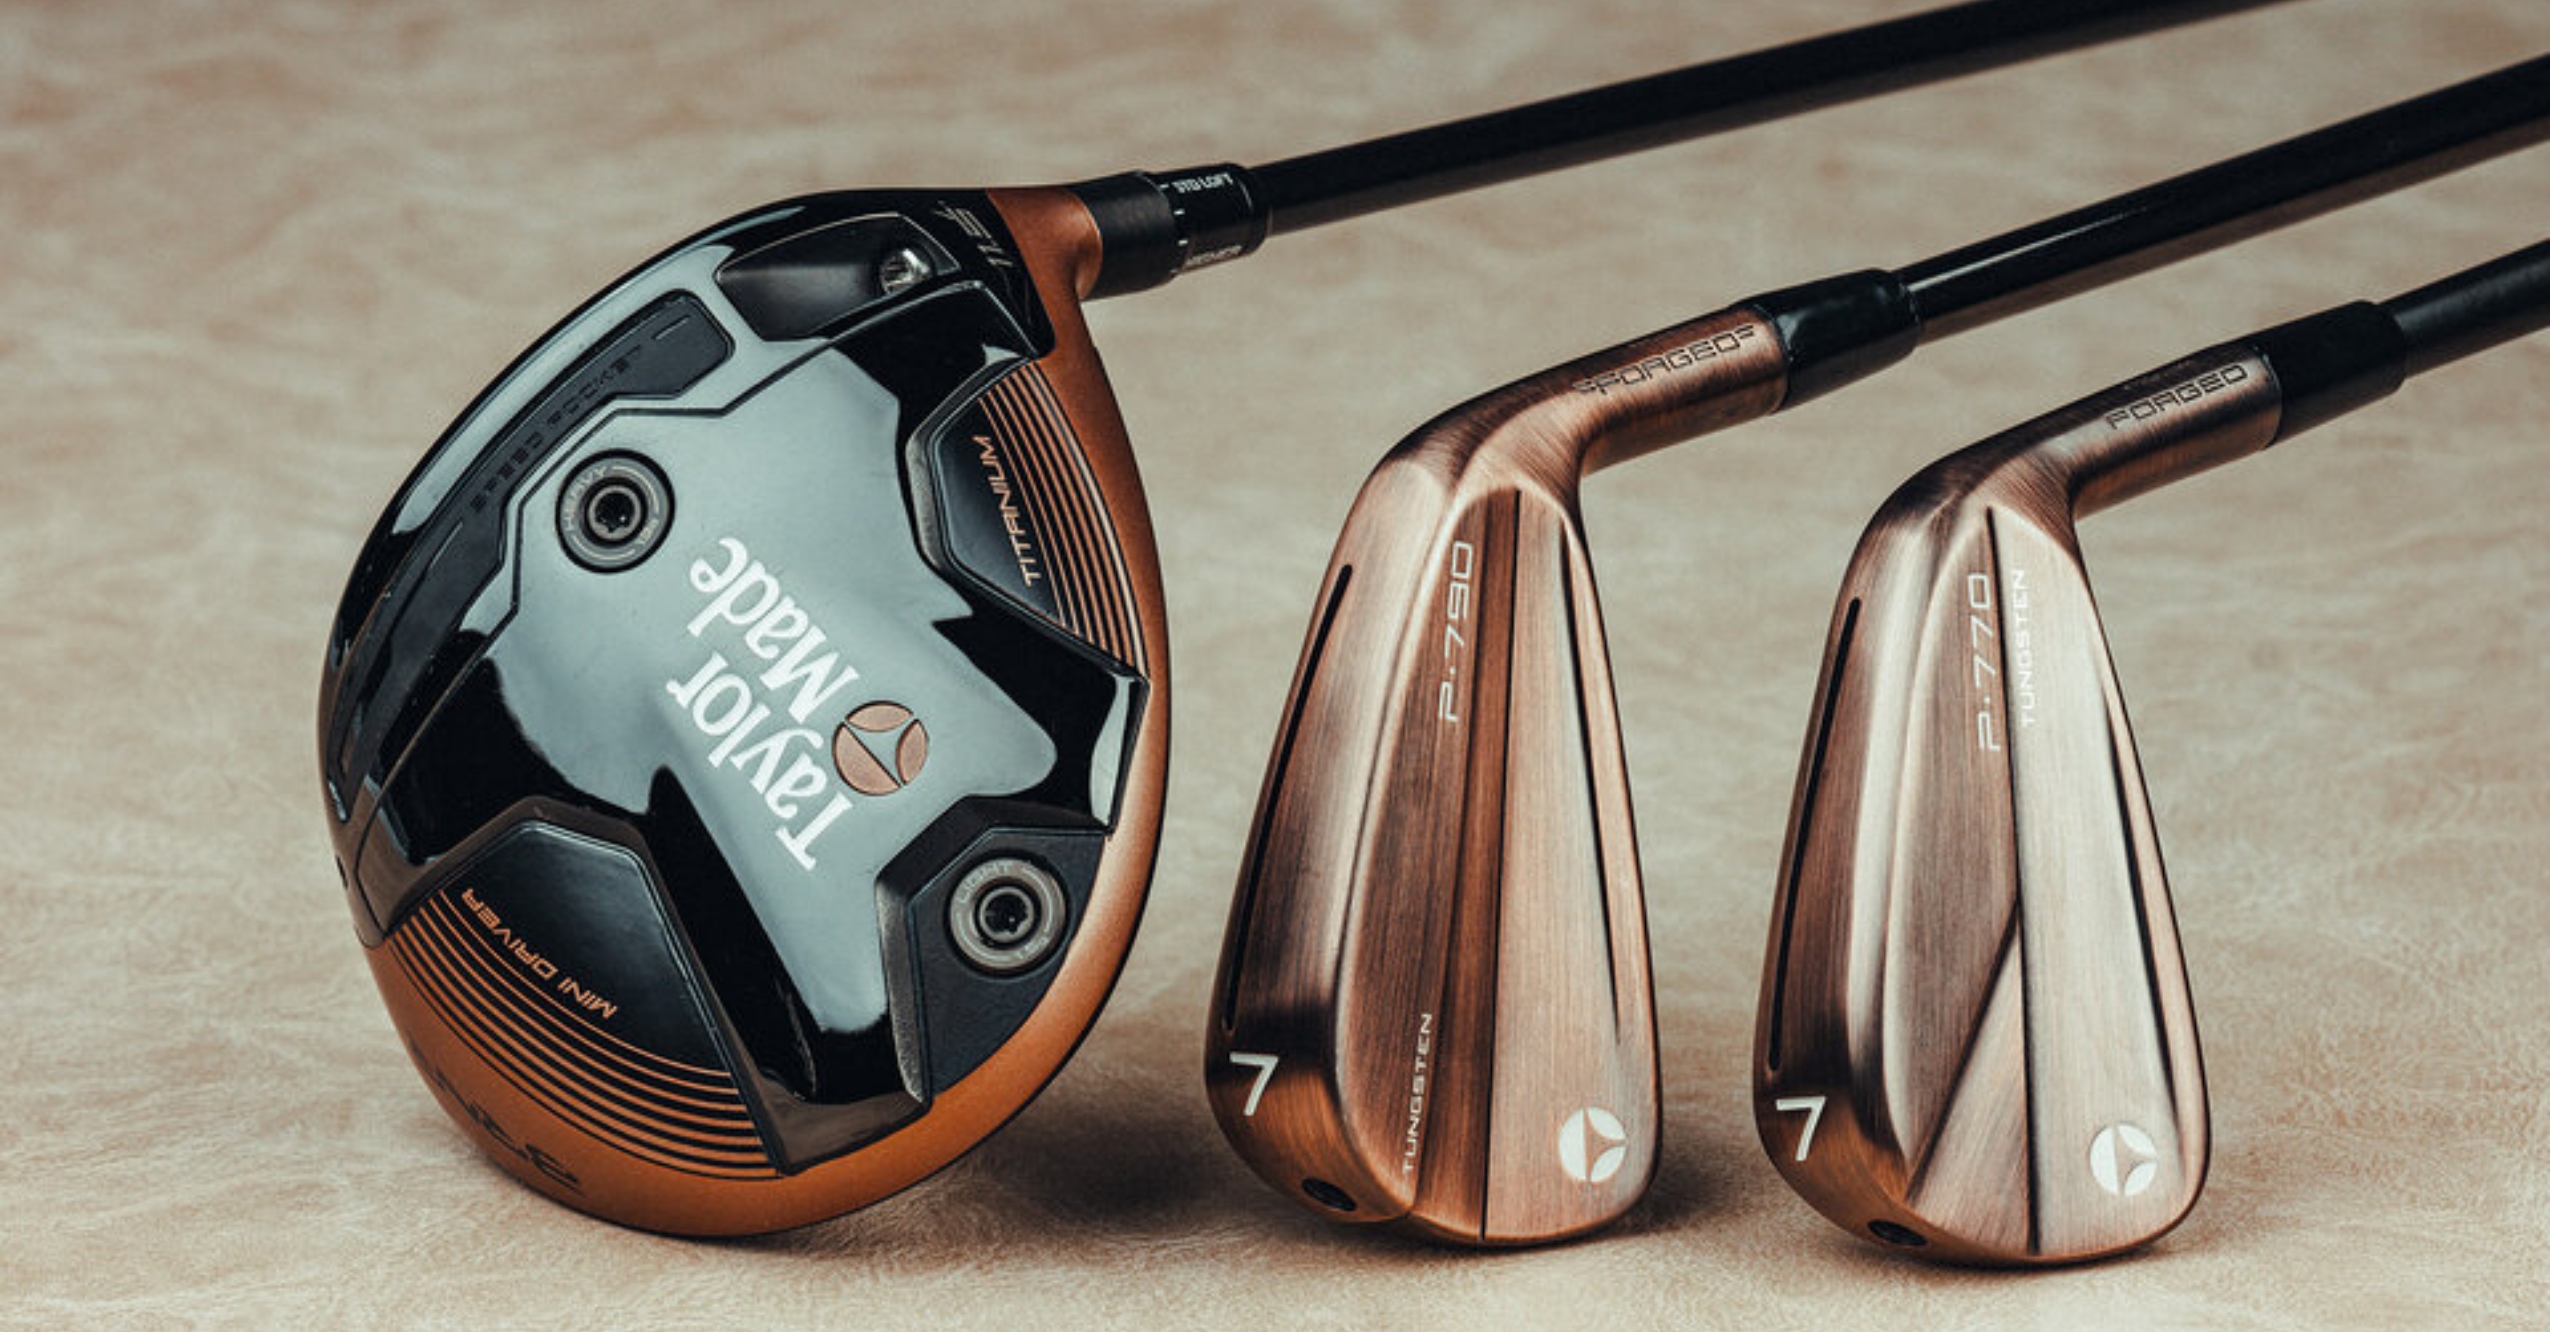 TaylorMade Debuts Vintage-Inspired Copper Irons To Elevate Your Golf Game